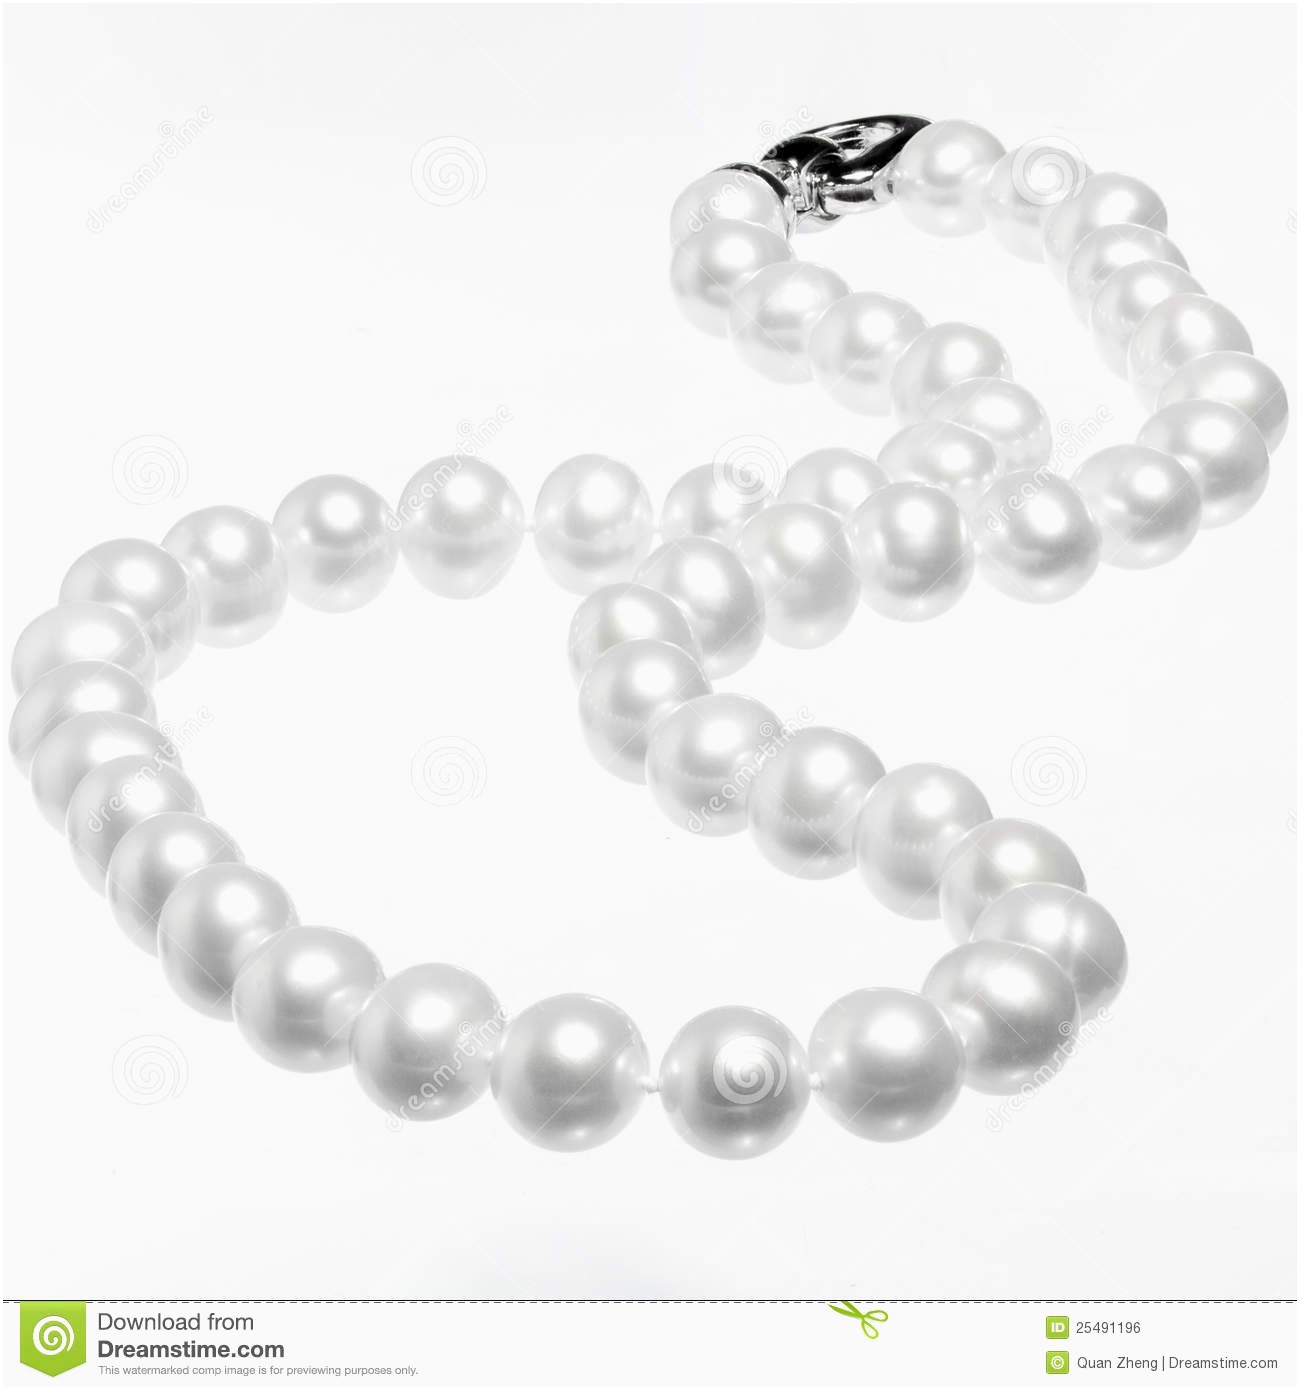 pearls clipart